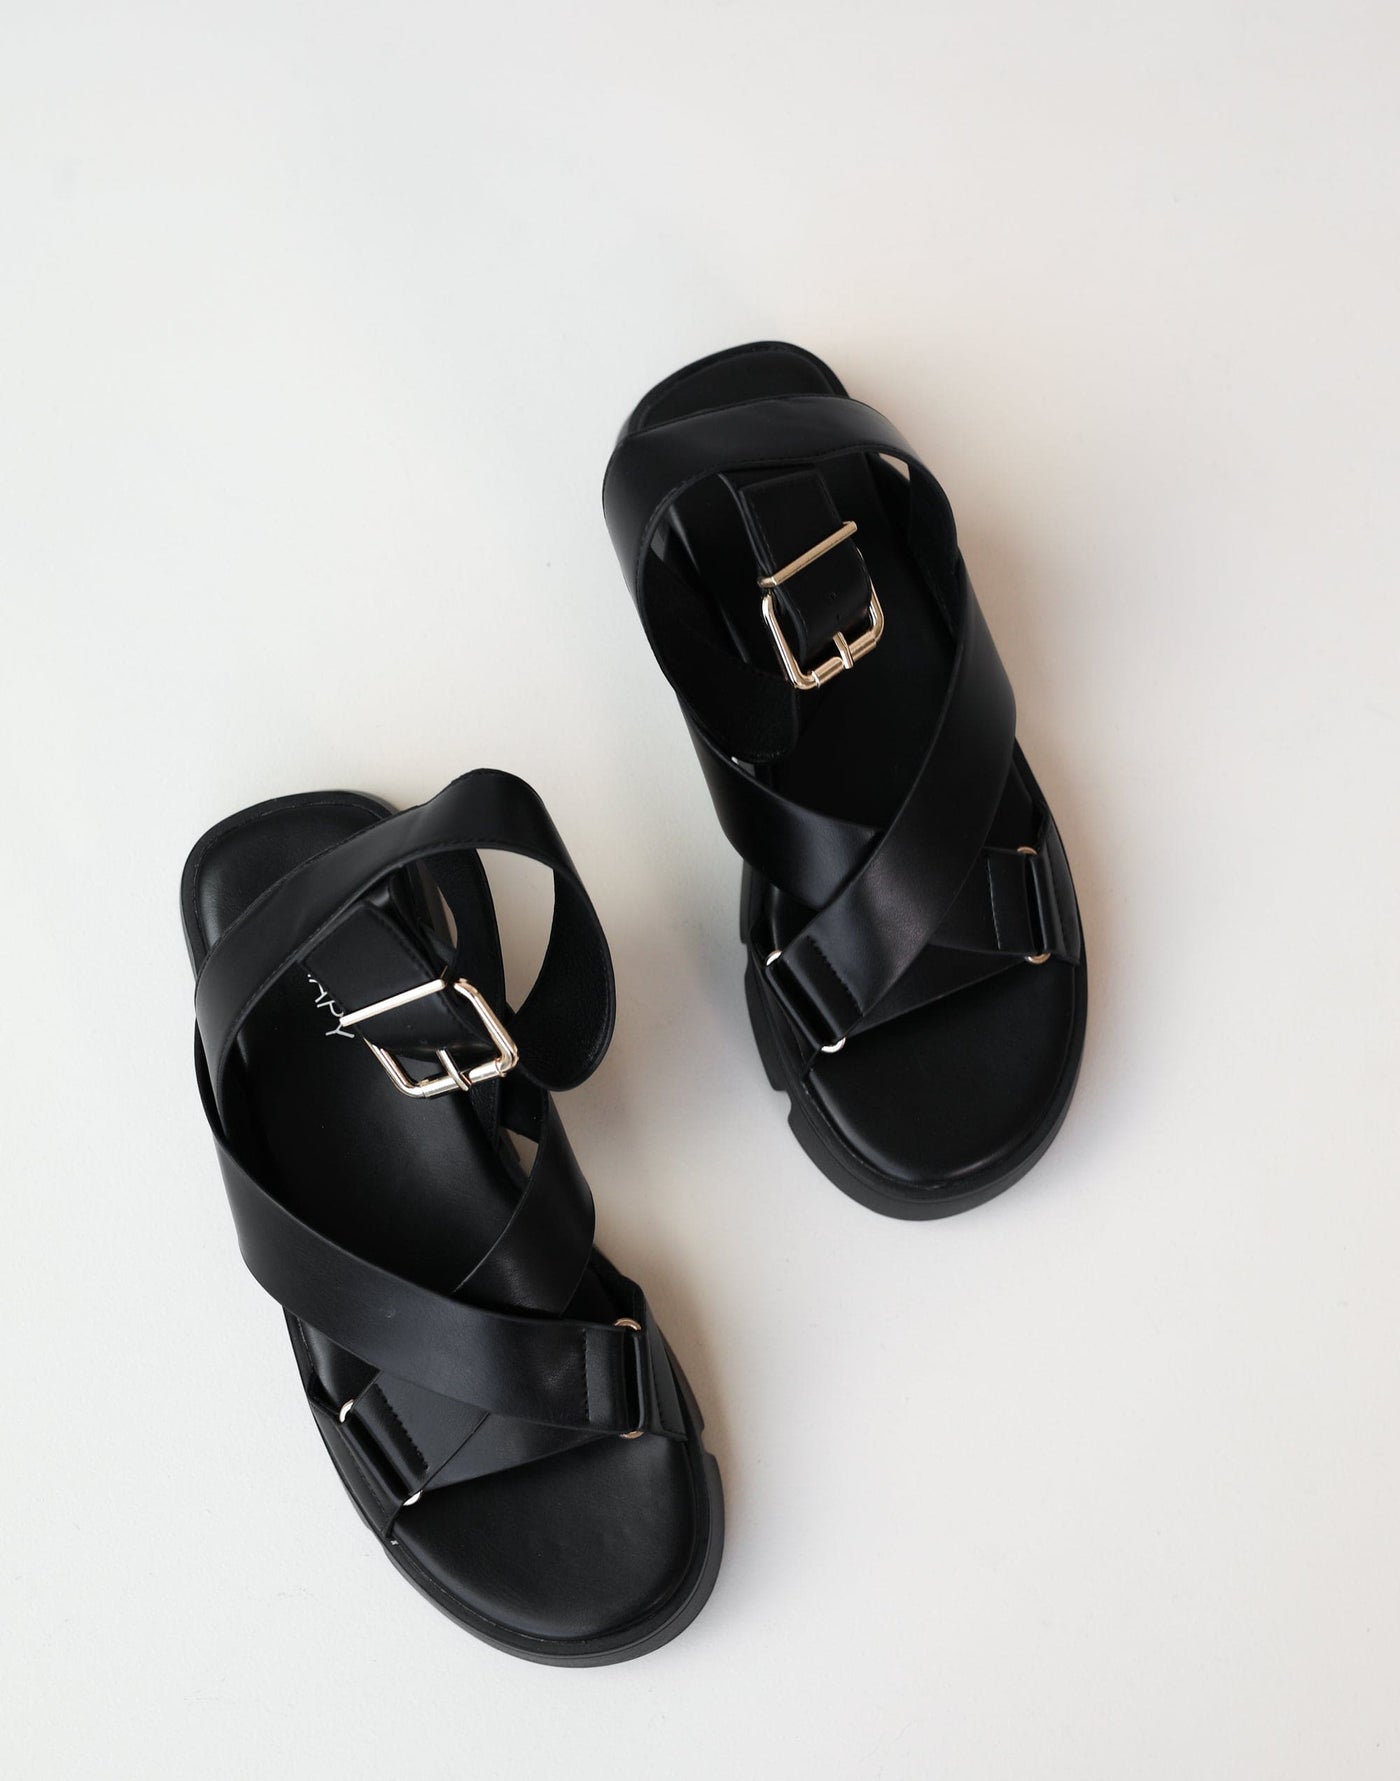 Maze Sandals (Black Smooth PU) - By Therapy - Crossover Strap Sandals - Women's Shoes - Charcoal Clothing